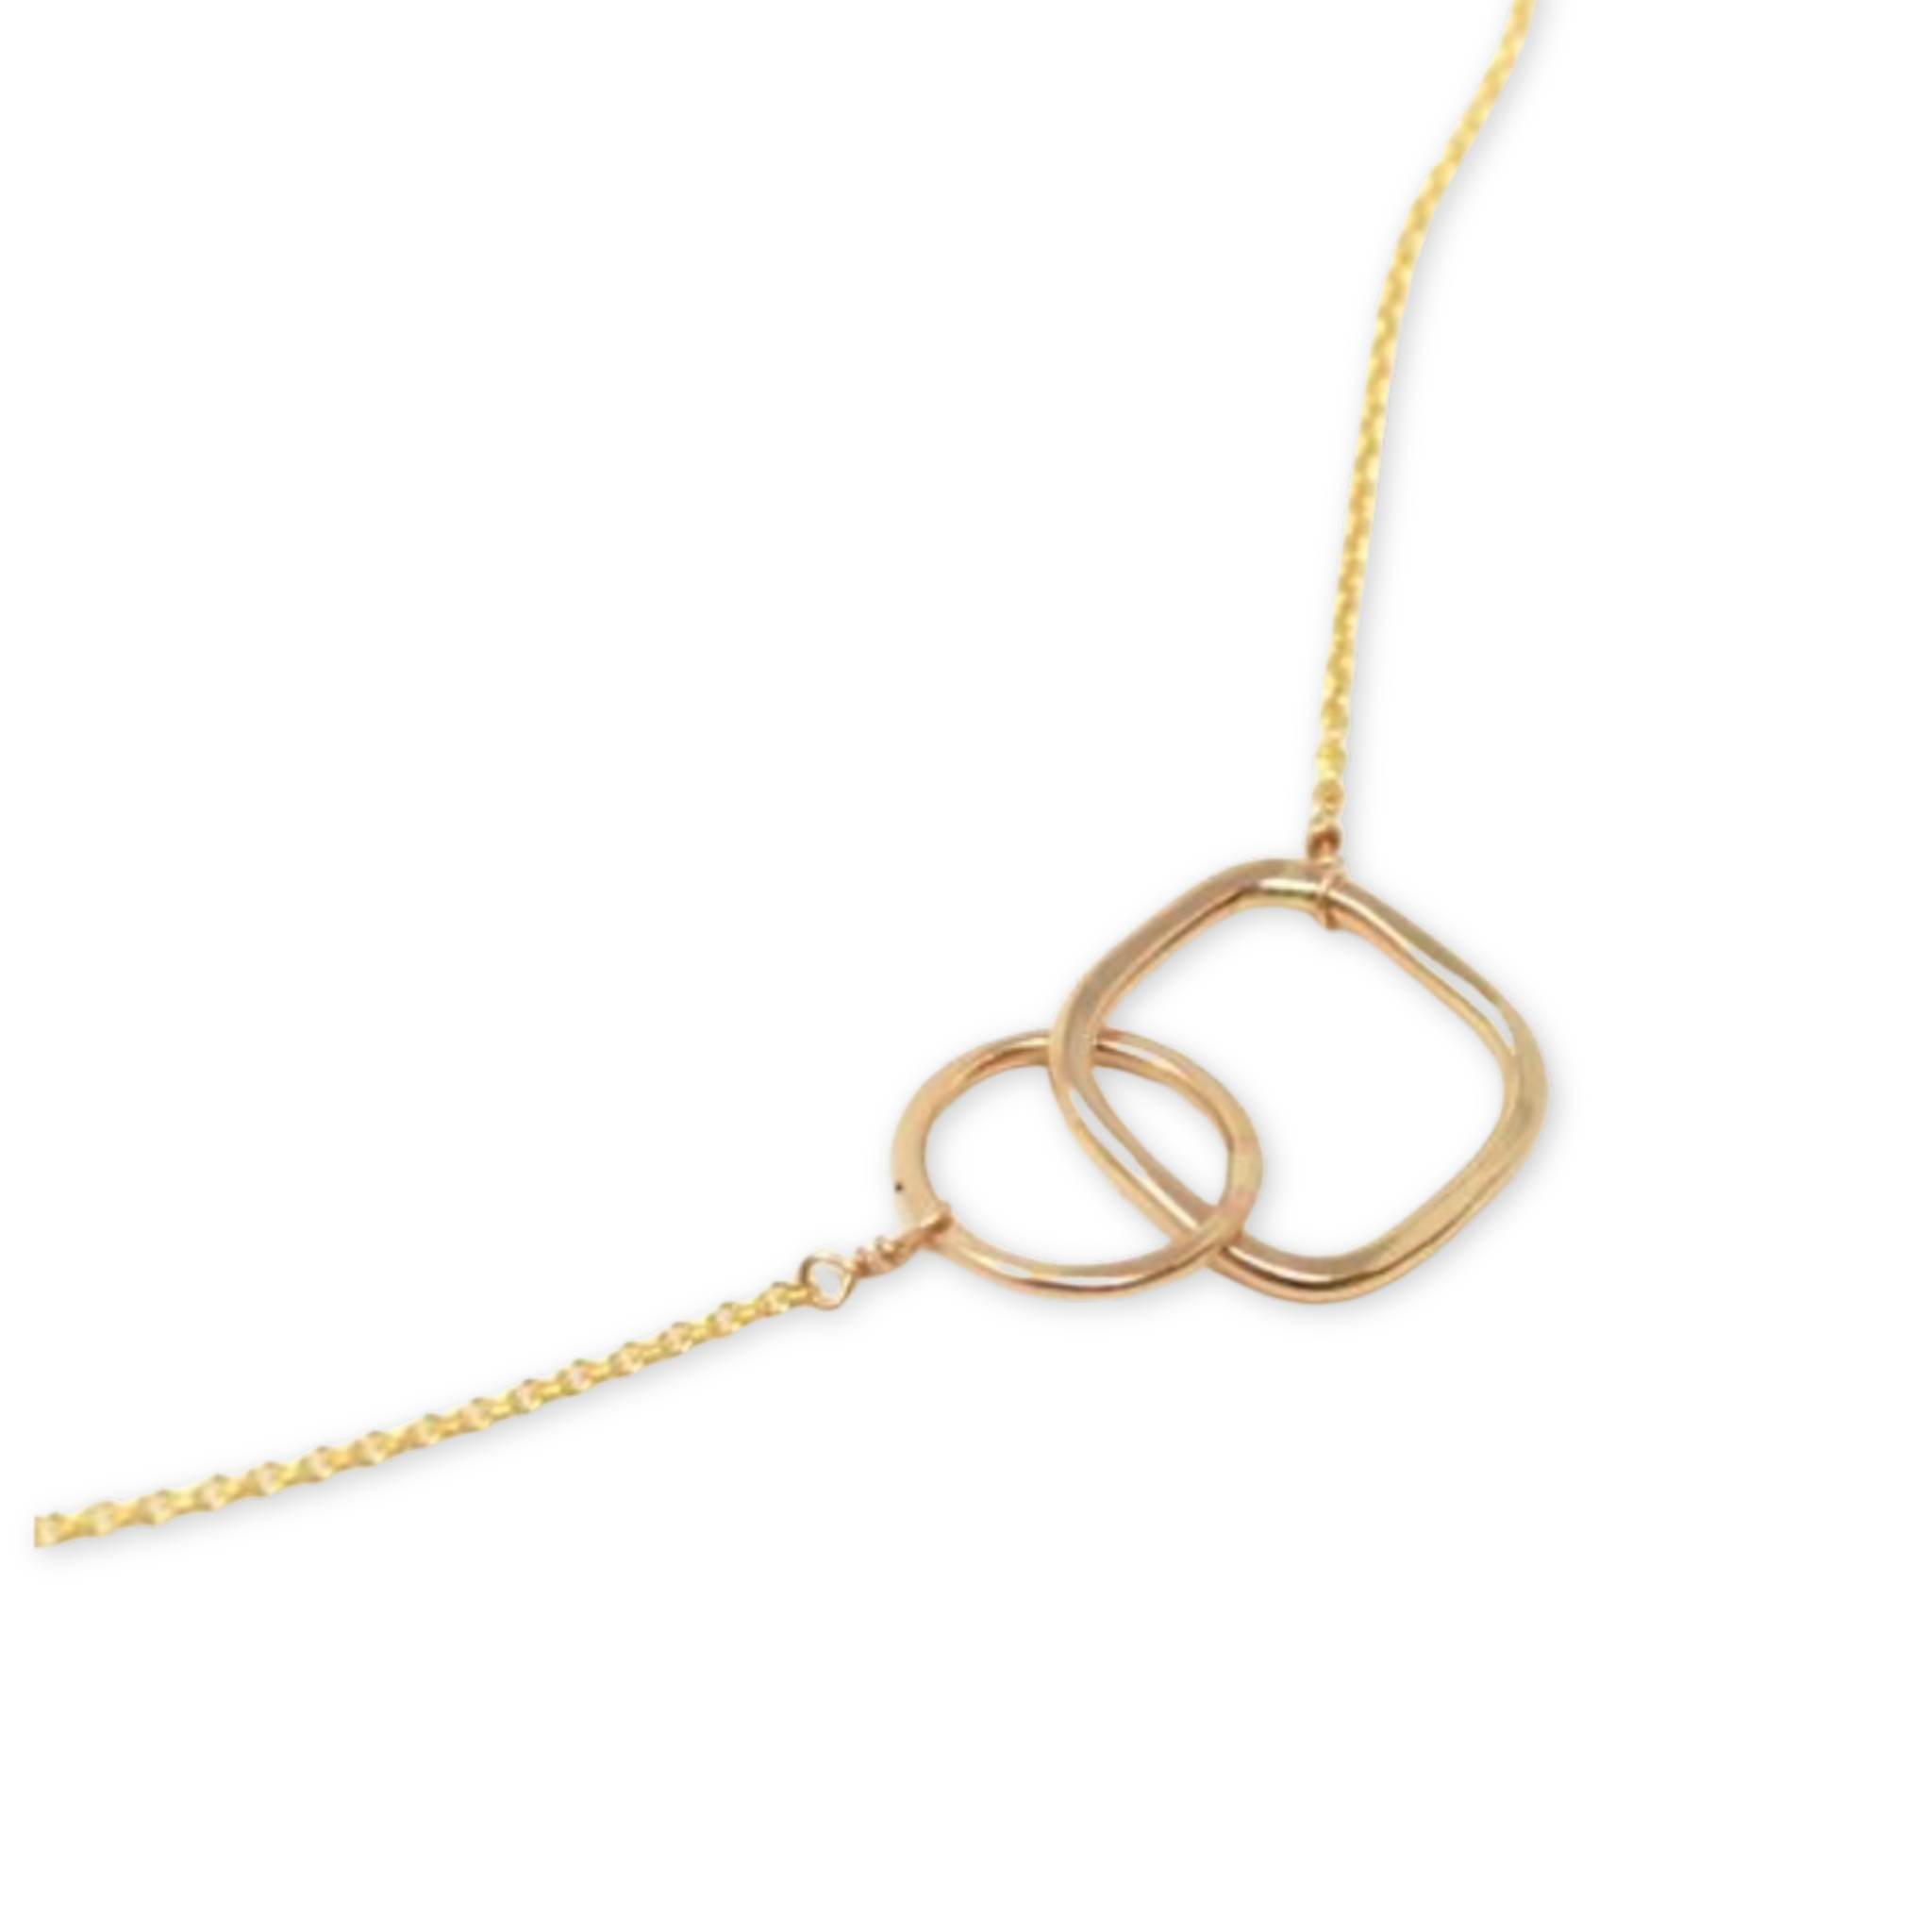 necklace with interlocking hammered circle and square on a thin chain